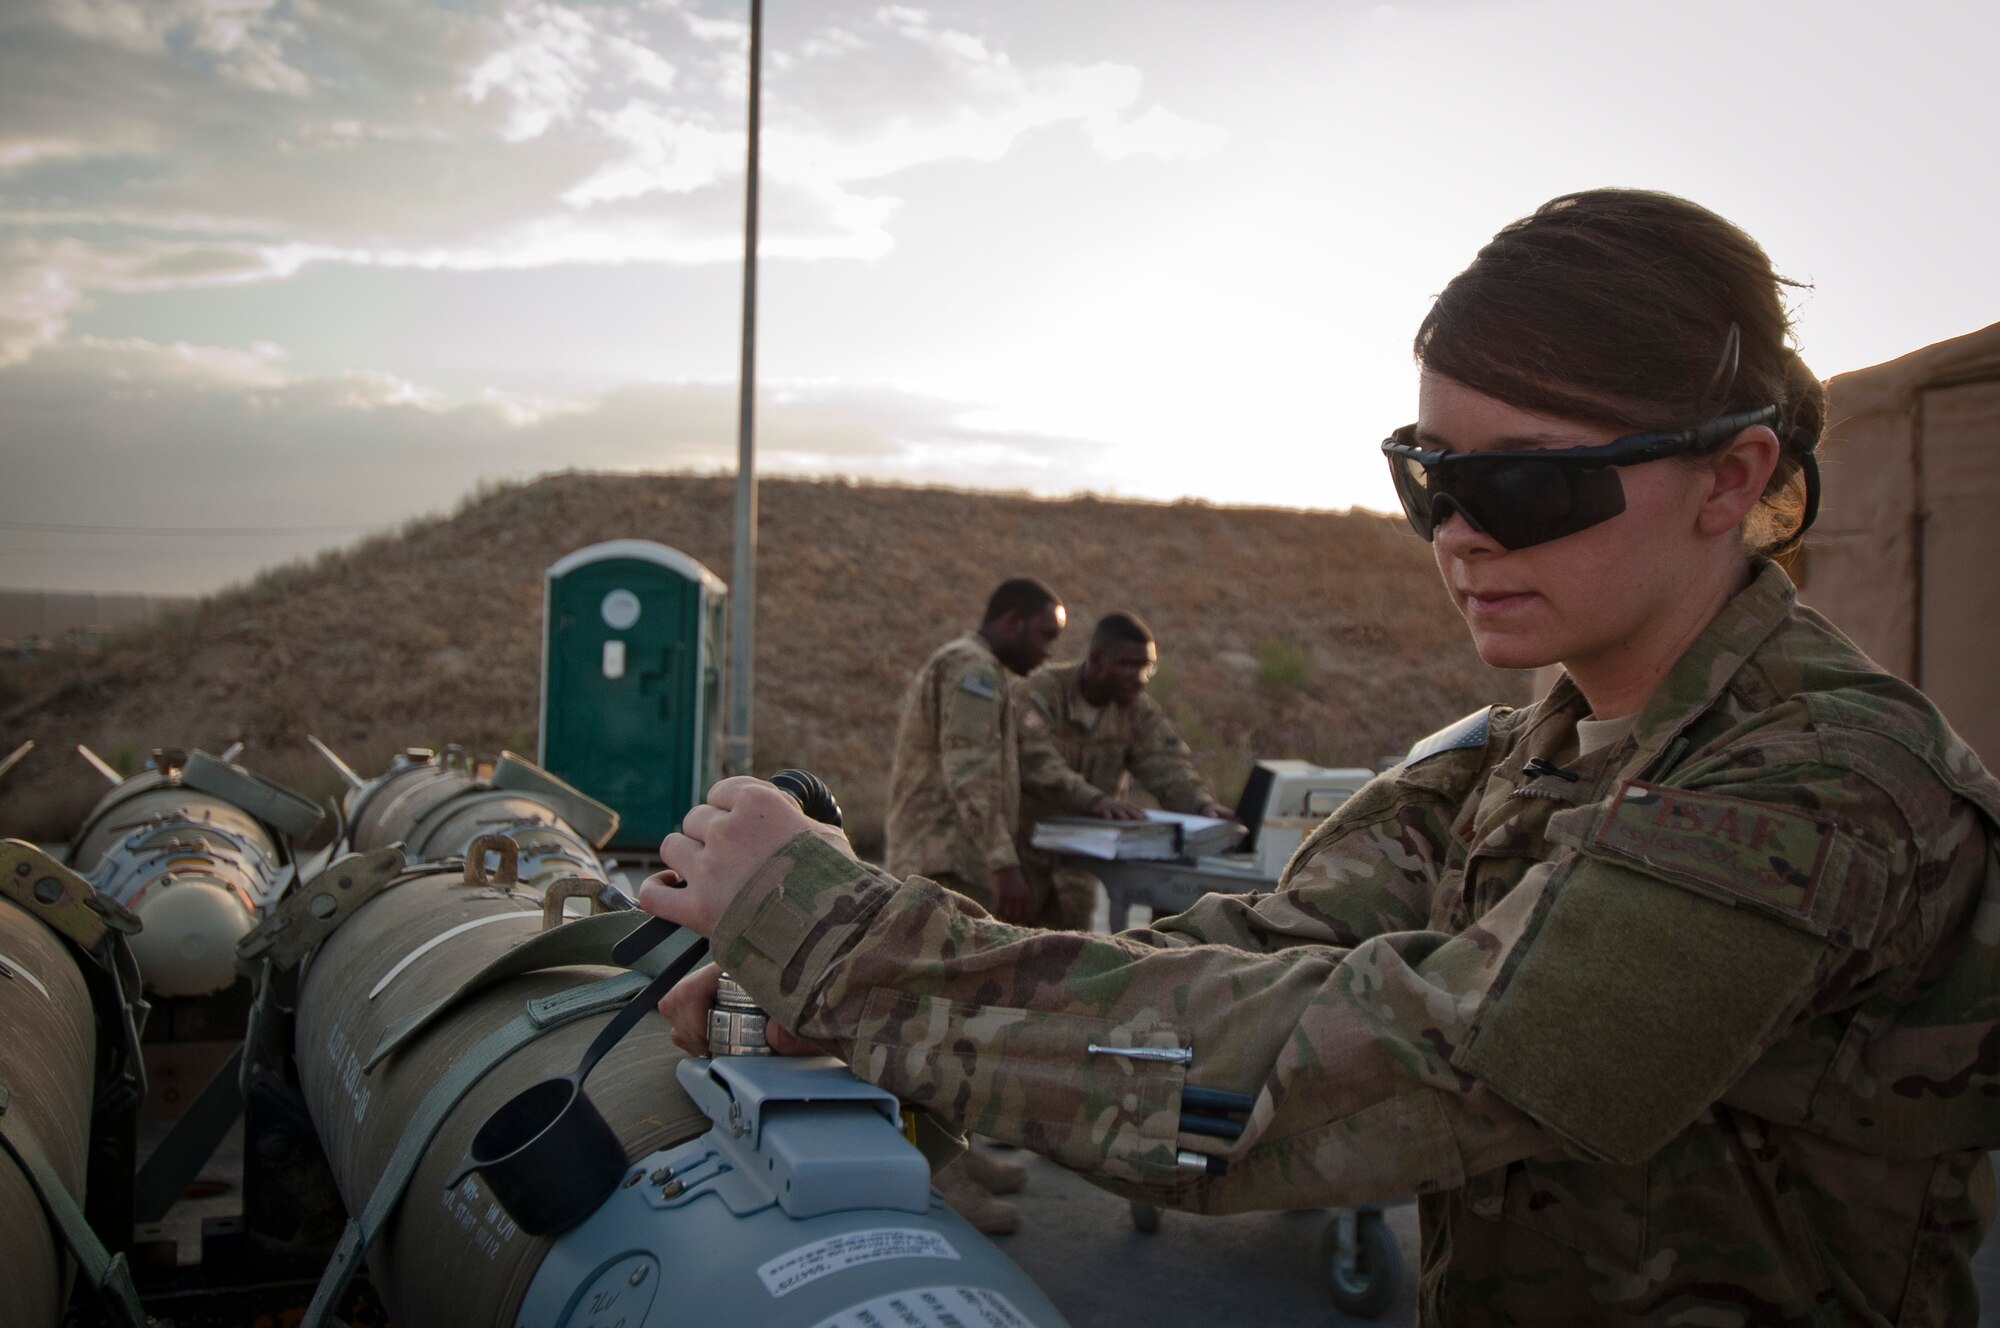 Airman 1st Class Mary Wiuff is a munitions systems specialist from the 188th Maintenance Squadron currently deployed with the 455th Expeditionary Maintenance Squadron, Bagram Airfield (BAF), Afghanistan. Wiuff checks a GBU-38 smart bomb’s guidance system June 23, 2012. Wiuff and her fellow maintainers sustain the fight by providing reliable, precise firepower to BAF’s aircrews. (U.S. Air Force photo by Capt. Raymond Geoffroy)